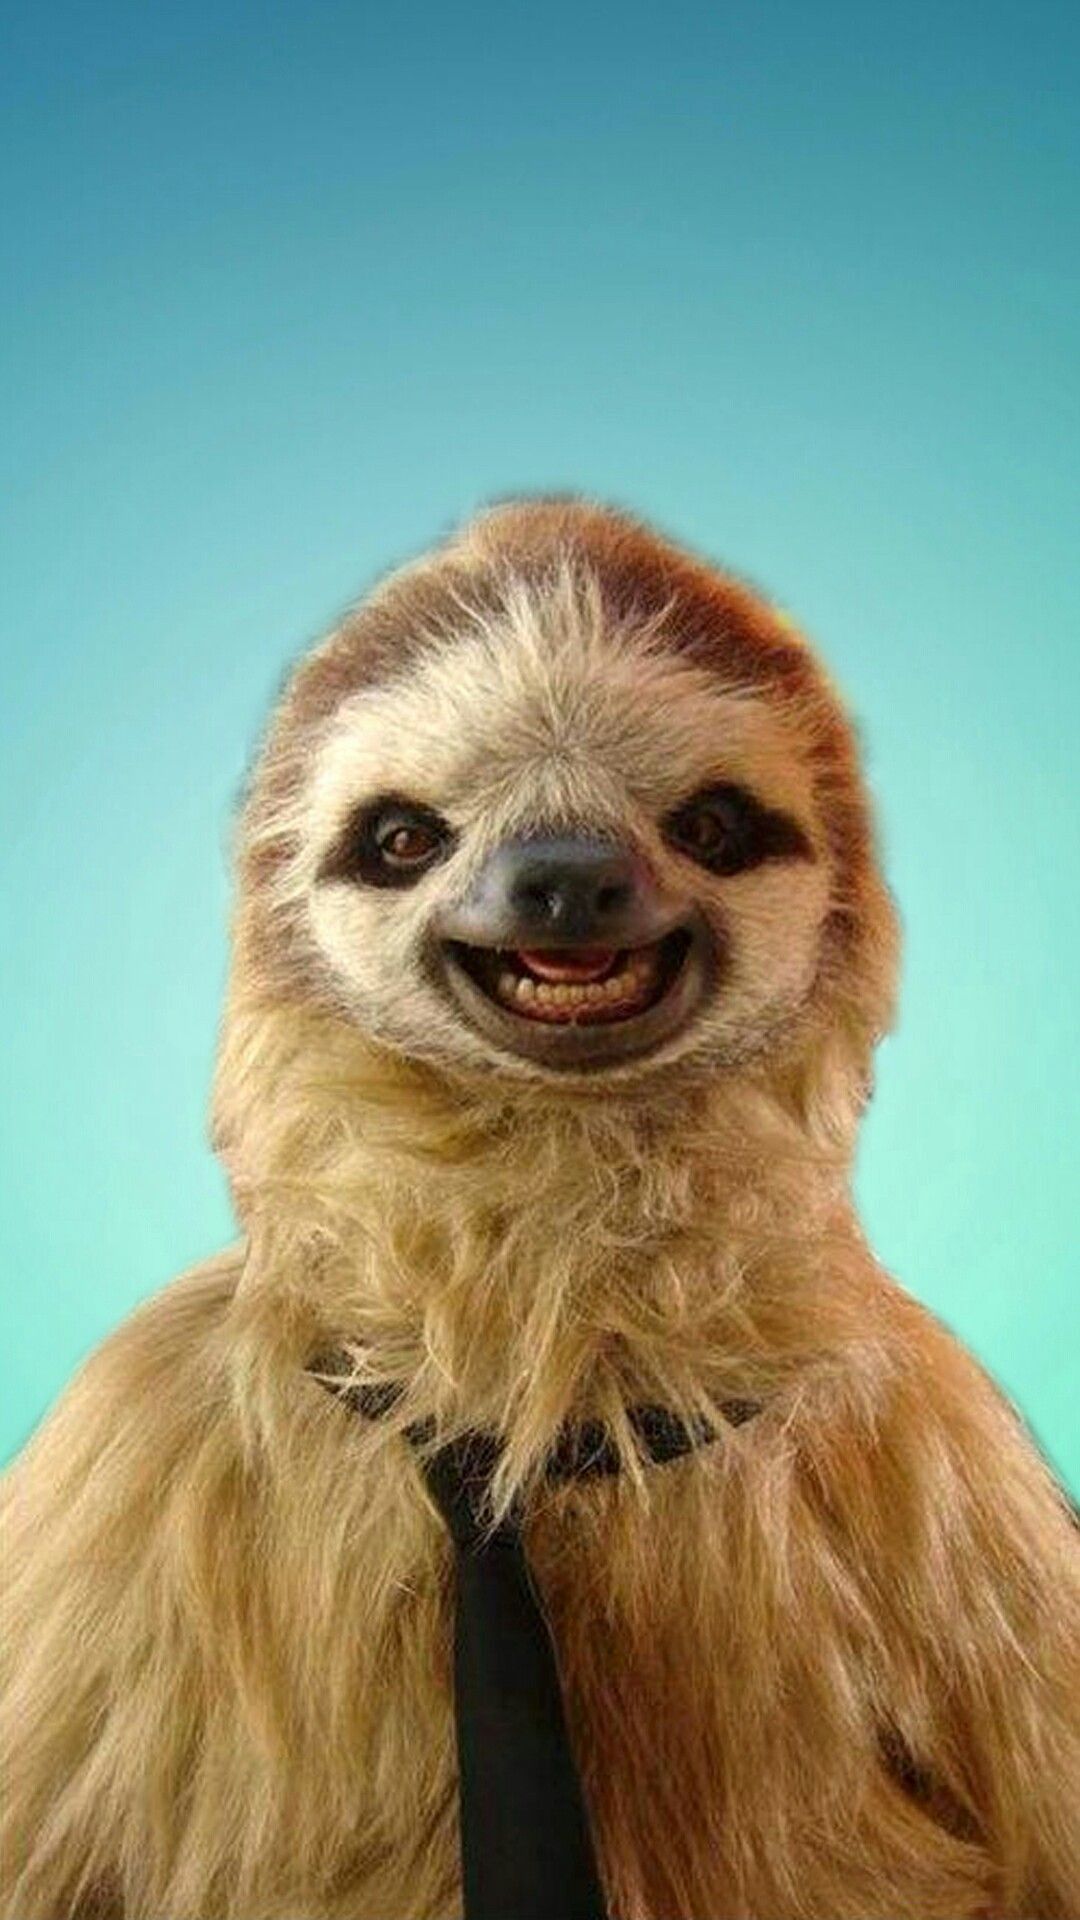 Best Of Sloth Wallpaper Phone Sloths Funny Cute Baby